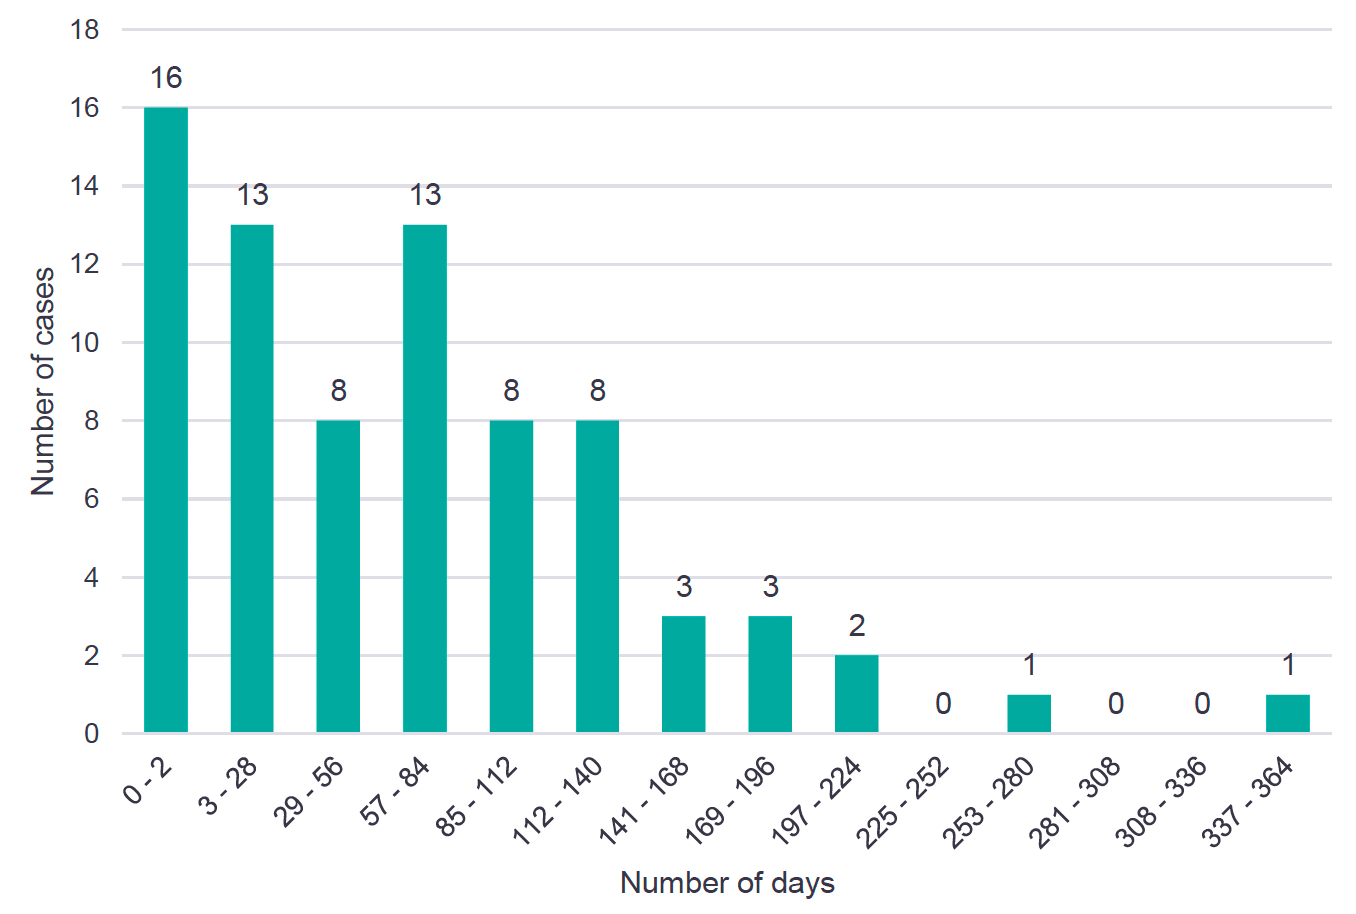 Chart 4 shows the number of days between the criminal complaint and CAAP-D being notified. 16 cases were between 0-2 days, 13 cases were 3-28 days, 8 cases were 29-56 days, 13 cases were 57-84 days, 8 cases were 85-112 days, 8 cases were 113-140 days, 3 cases were 141-168 days, 3 cases were 169-196 days, 2 cases were 197-224 days, 0 cases were 225-252 days, 1 case was 253-280 days, 0 cases were between 281 and 336 days, and 1 case was 337-364 days